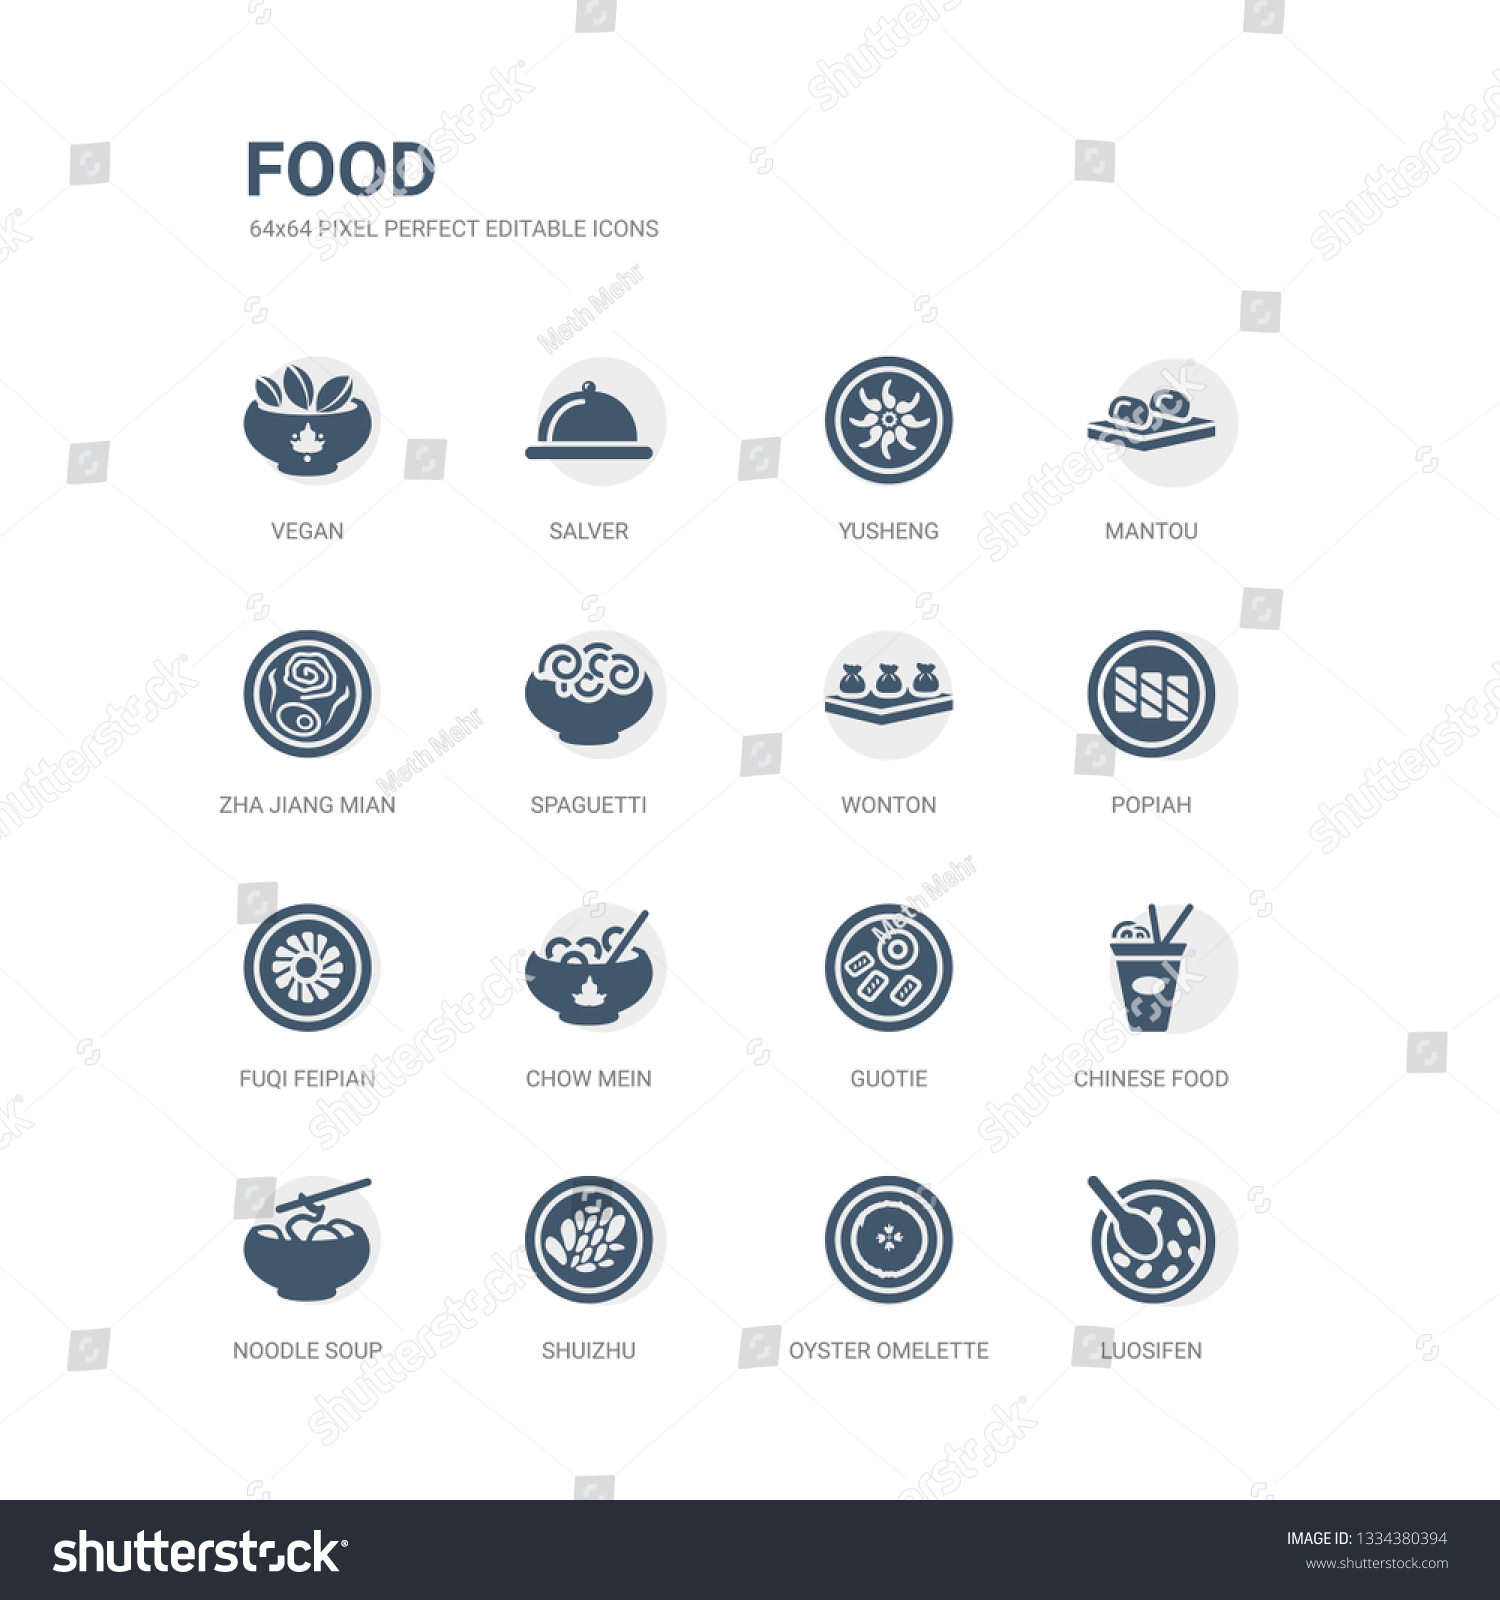 SVG of simple set of icons such as luosifen, oyster omelette, shuizhu, noodle soup, chinese food, guotie, chow mein, fuqi feipian, popiah, wonton. related food icons collection. editable 64x64 pixel svg